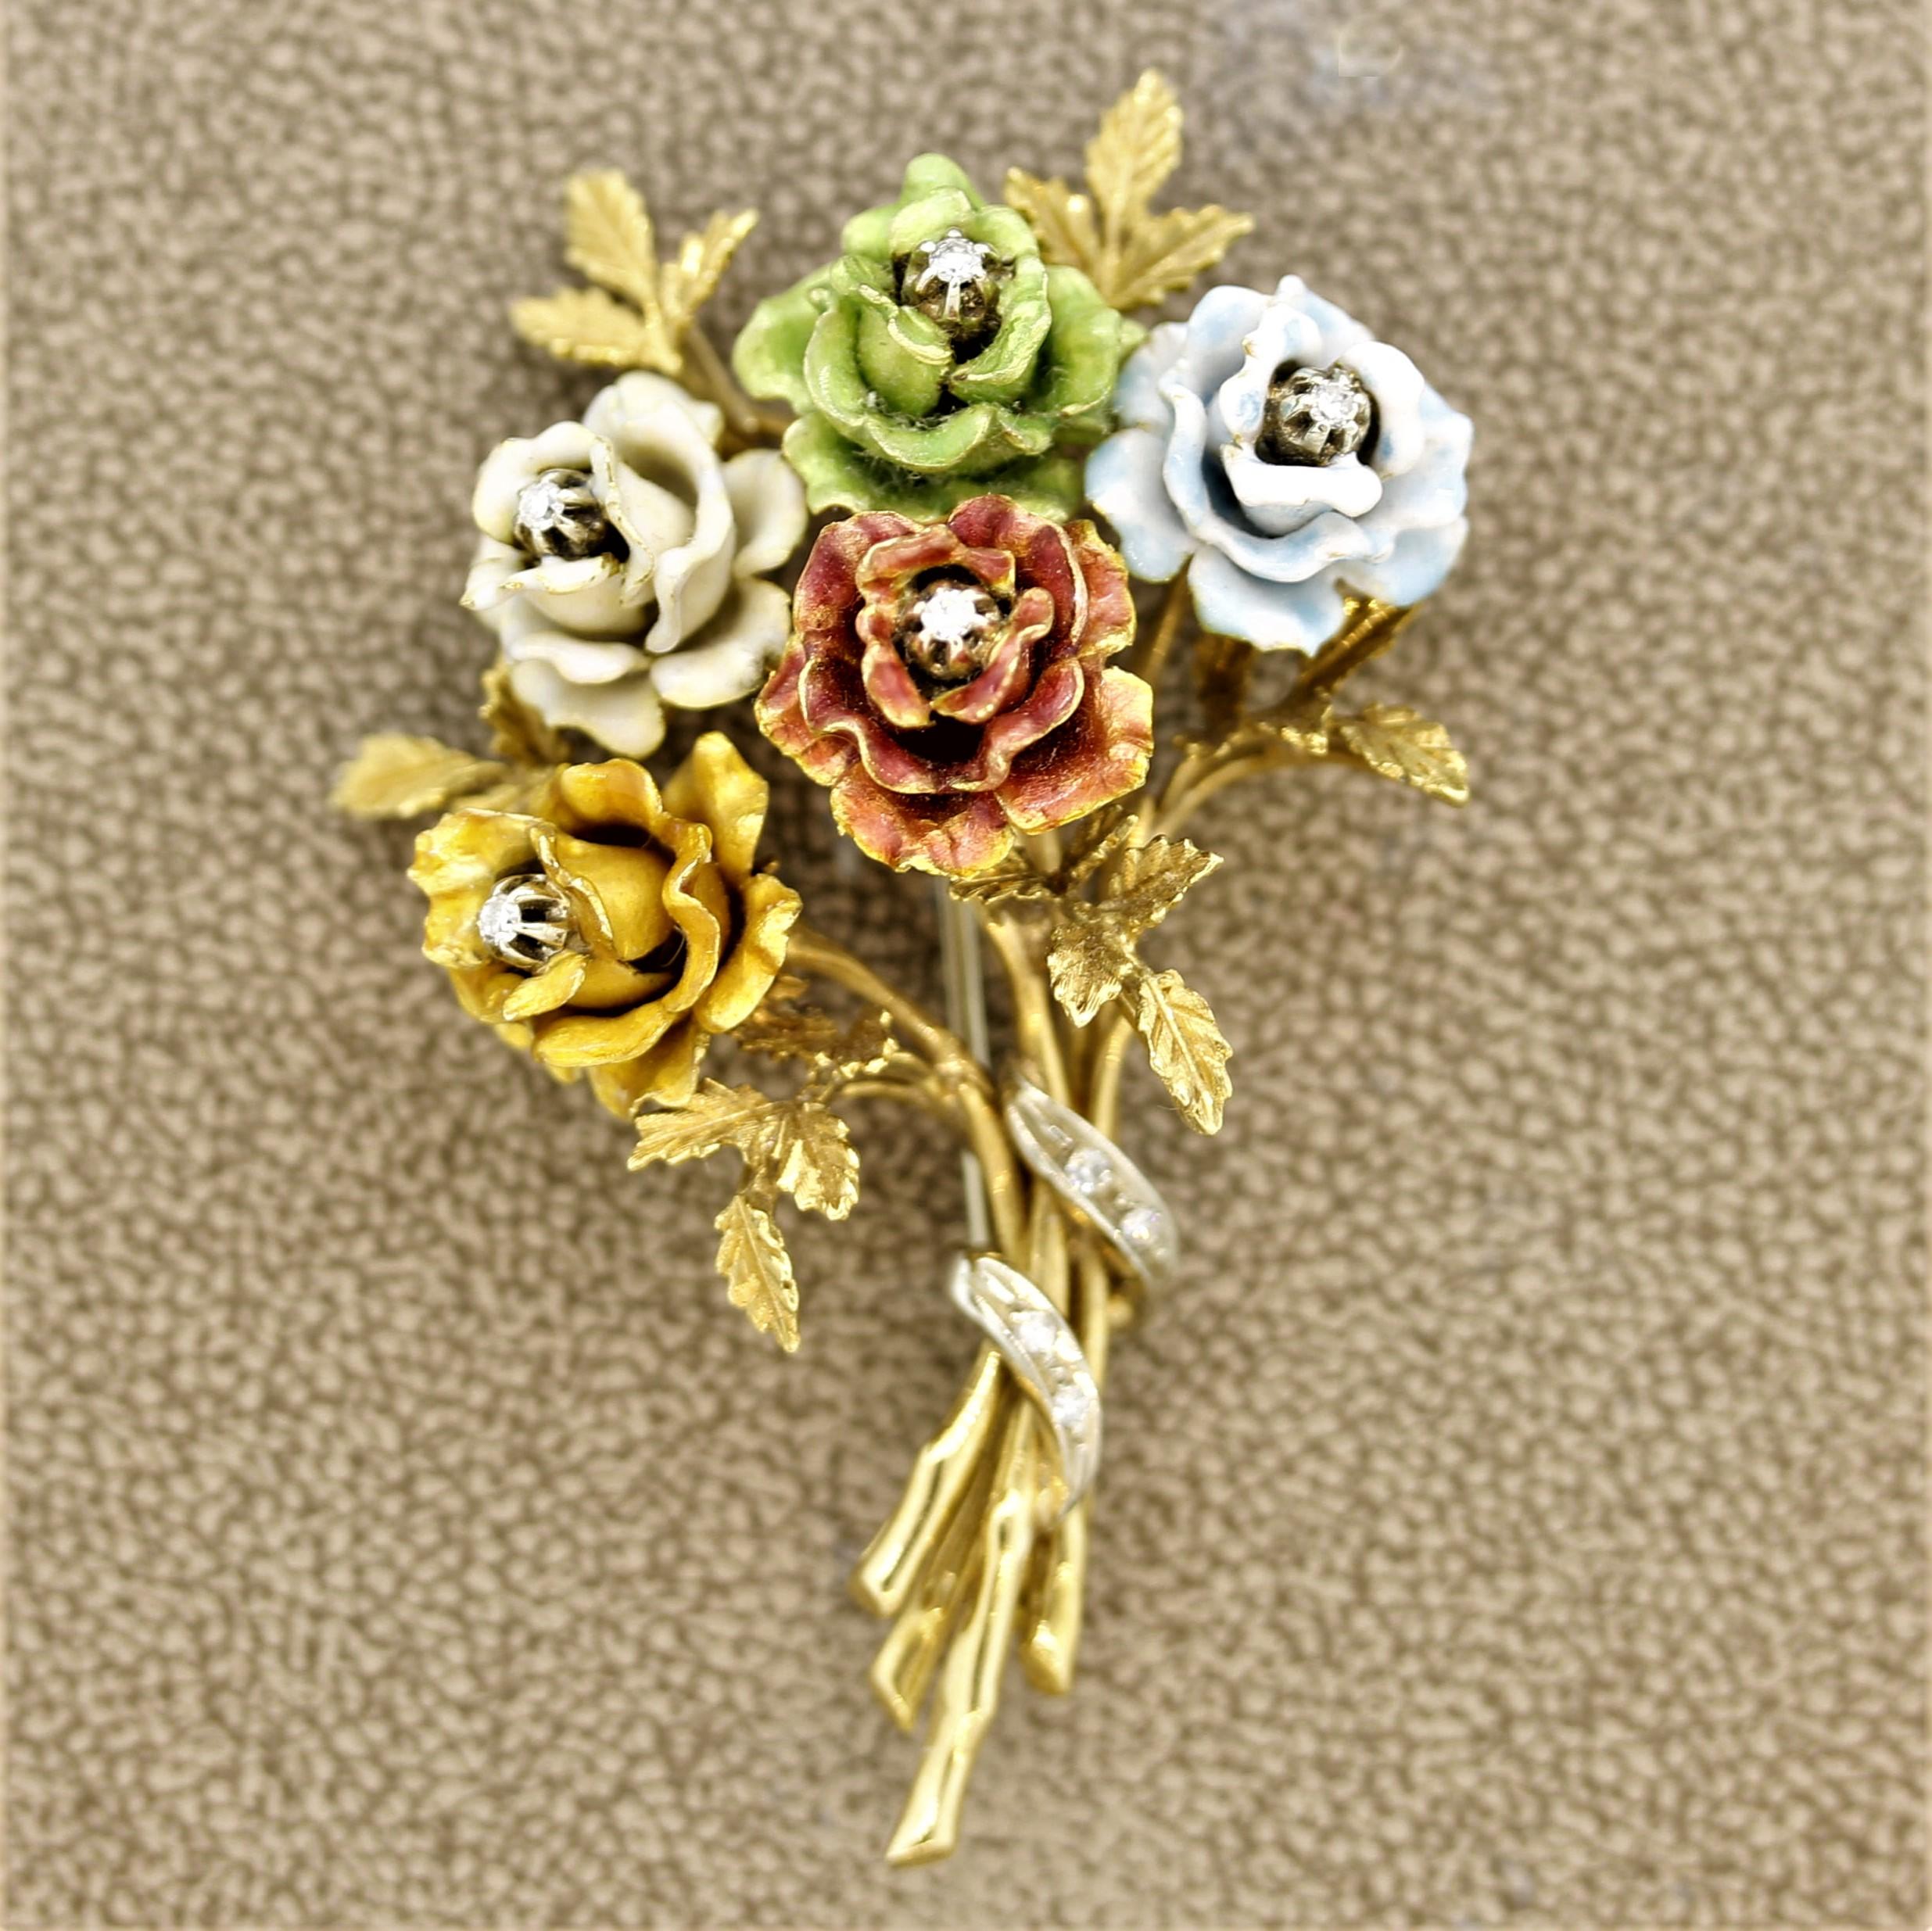 An exquisite example of Italian goldwork. Each of the 5 roses are expertly hand worked to display natural folds and curves of the petals. Adding to that, they are hand painted with enamel which is a liquid glass that goes over the gold. There are